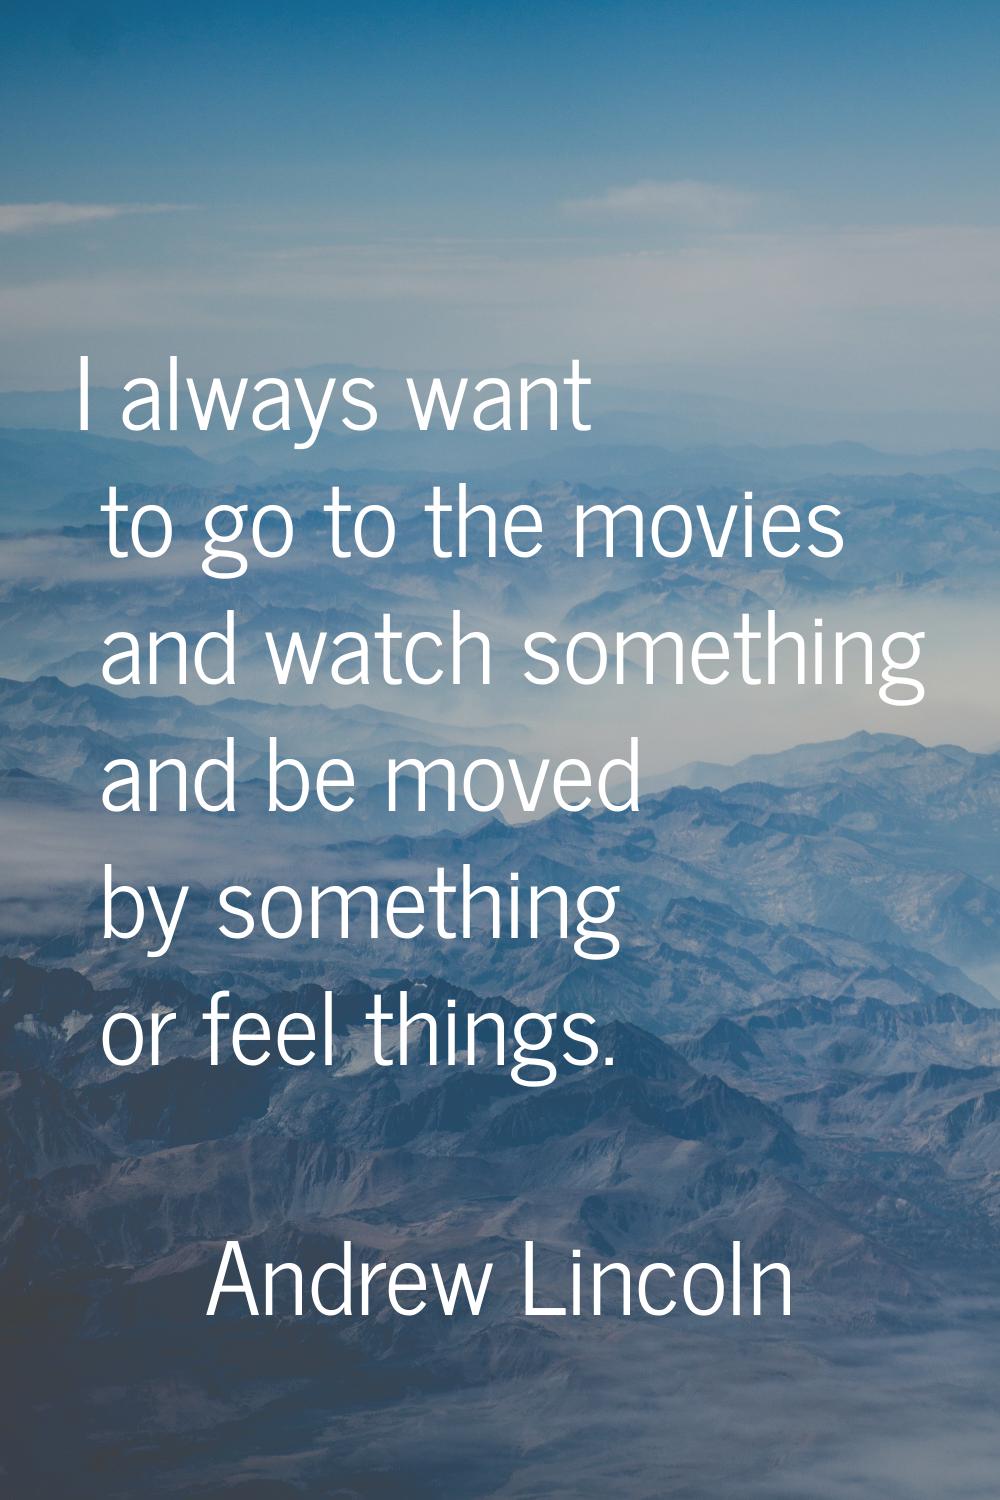 I always want to go to the movies and watch something and be moved by something or feel things.